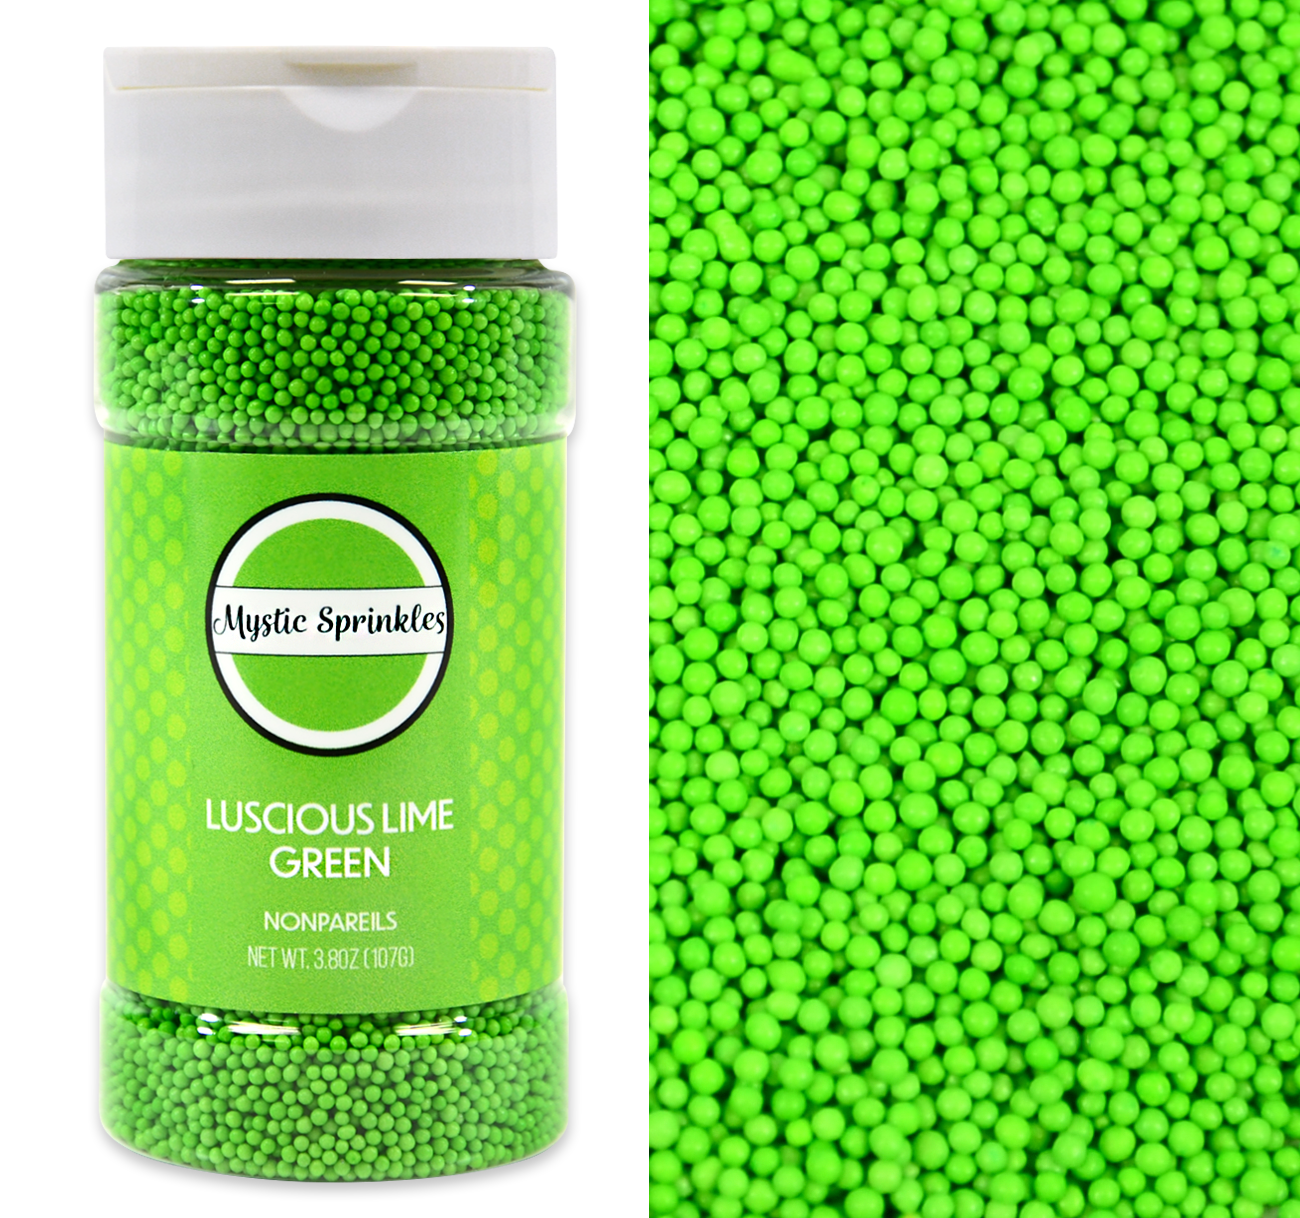 Mystic Sprinkles Luscious Lime Green Nonpareils 3.8 Ounce Bottle - image 1 of 4